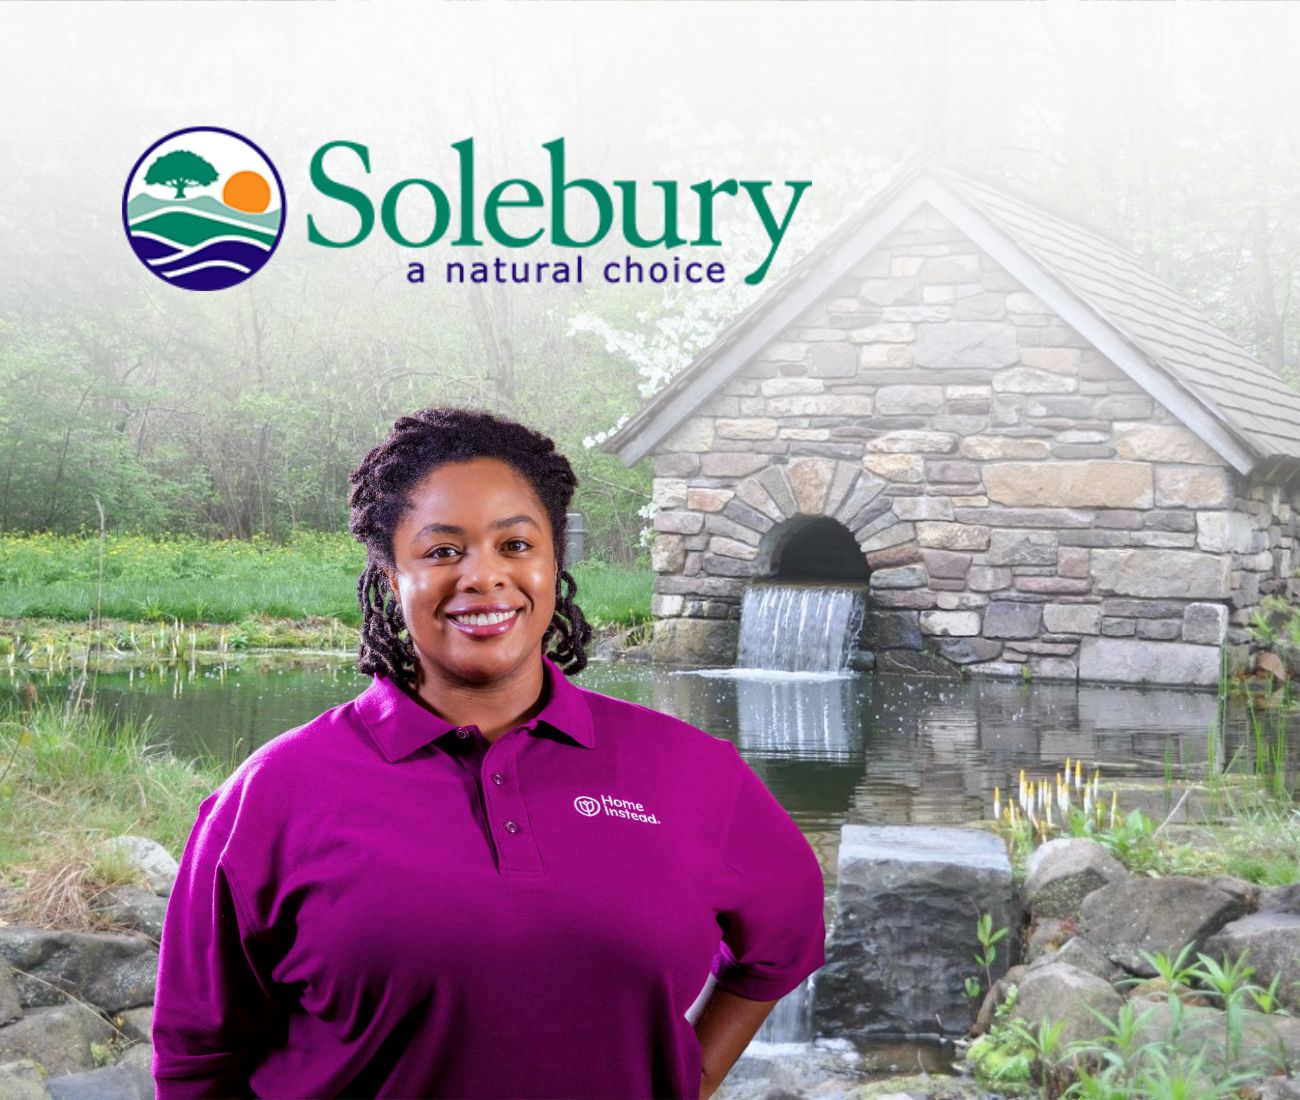 Home Instead caregiver with Solebury, PA in the background